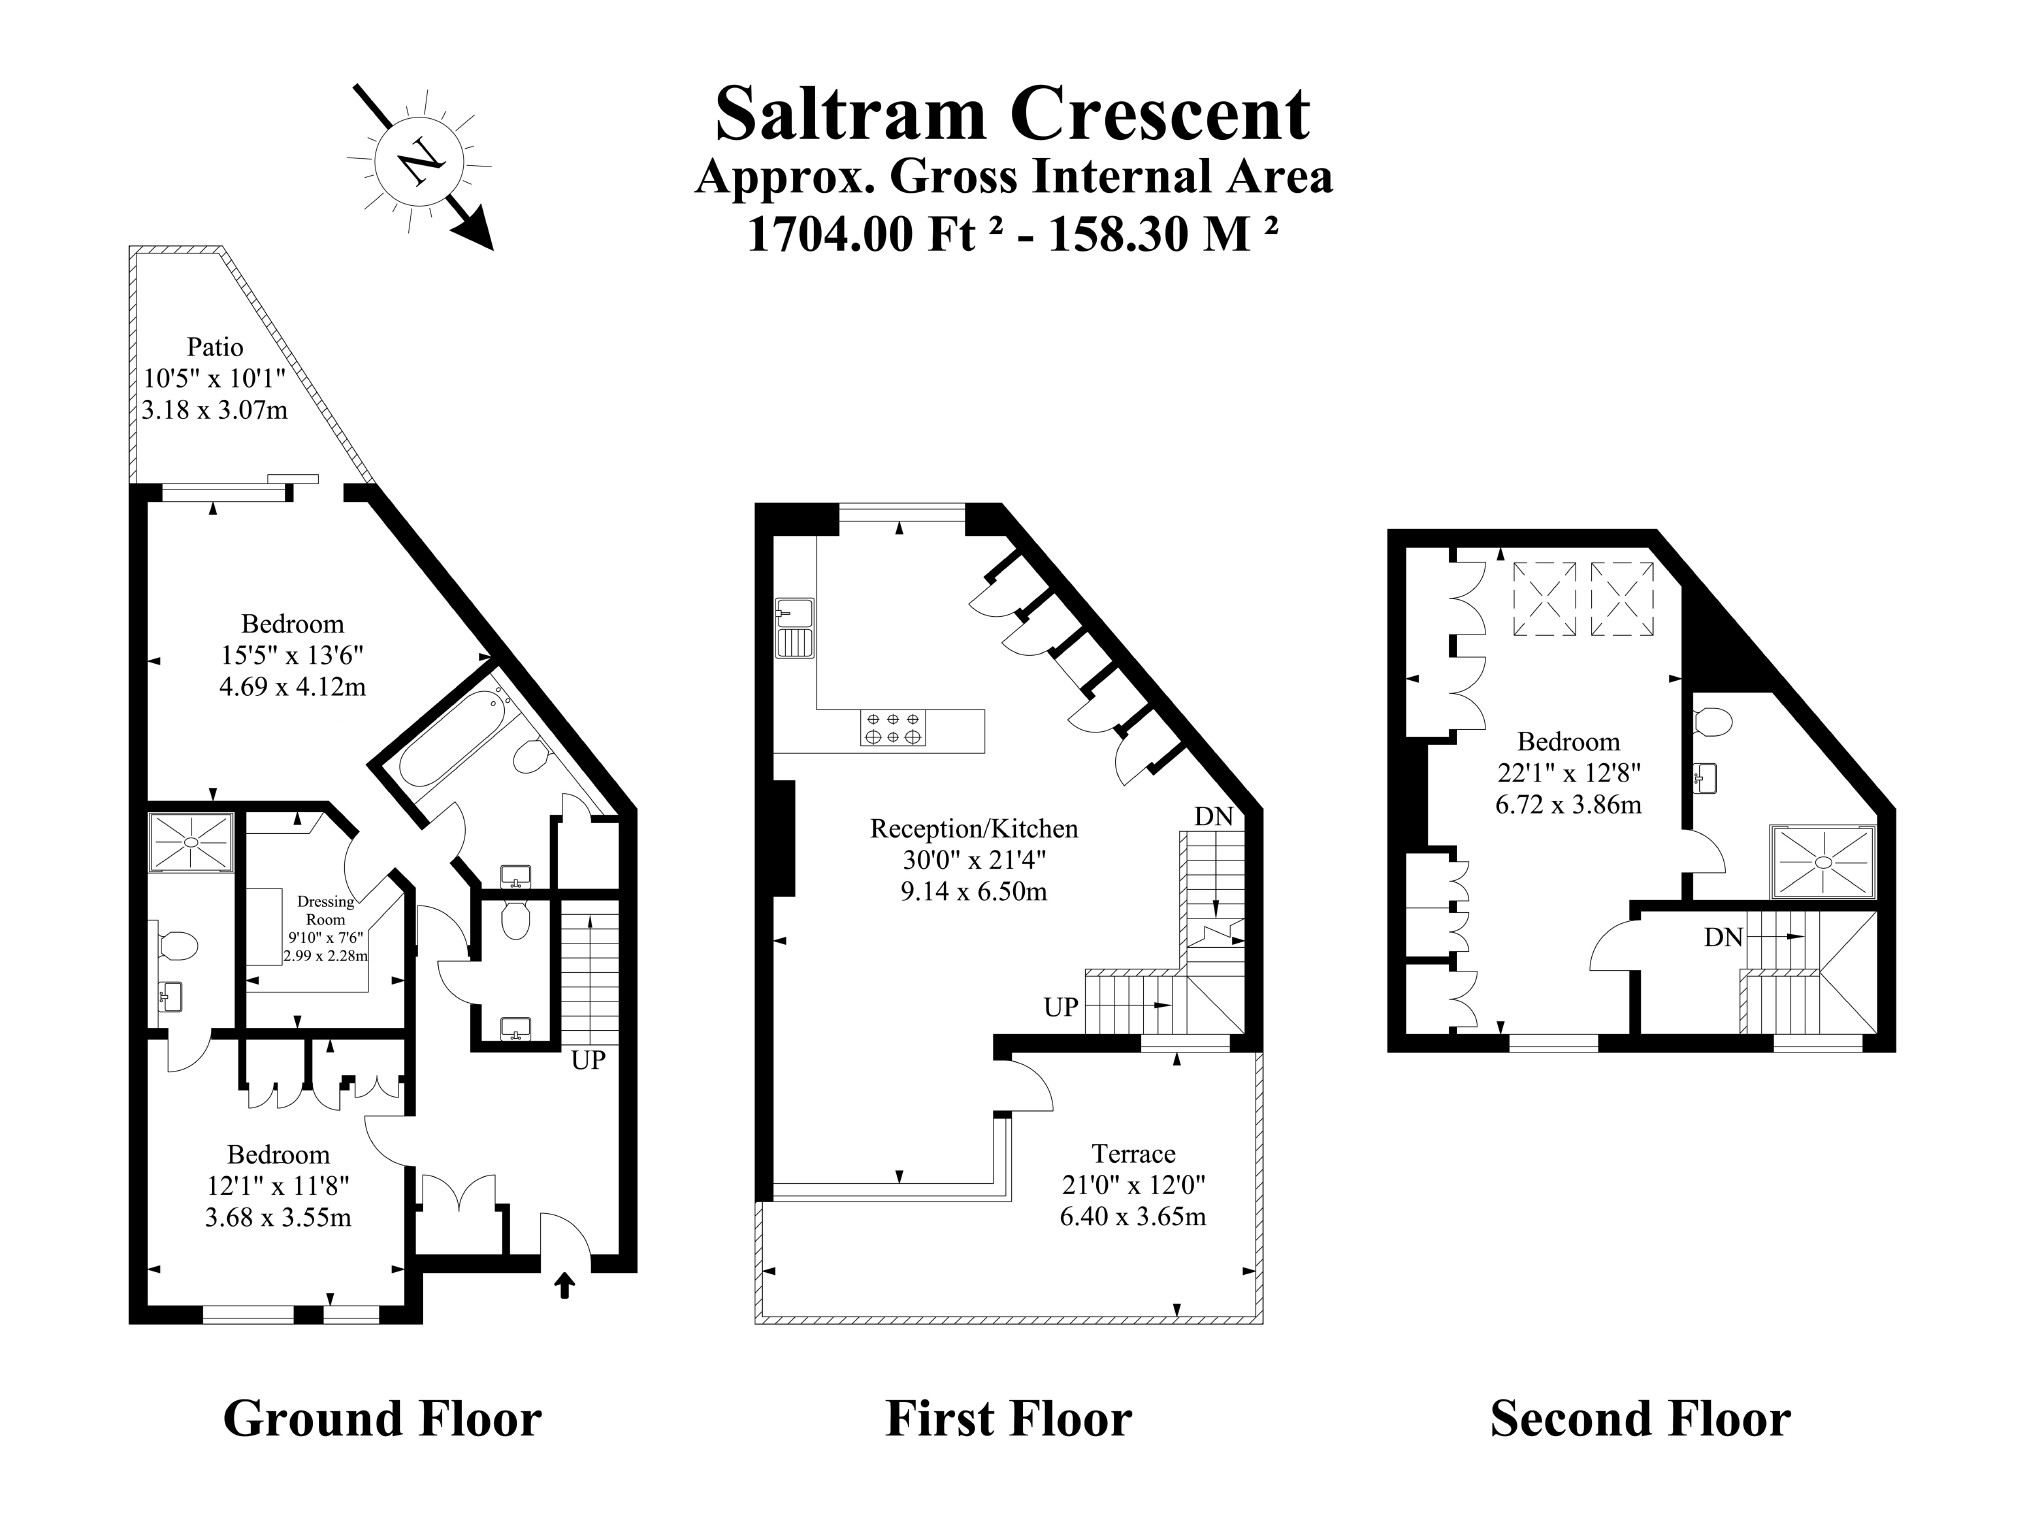 3 Bedrooms Semi-detached house for sale in Saltram Crescent, Maida Vale, London W9